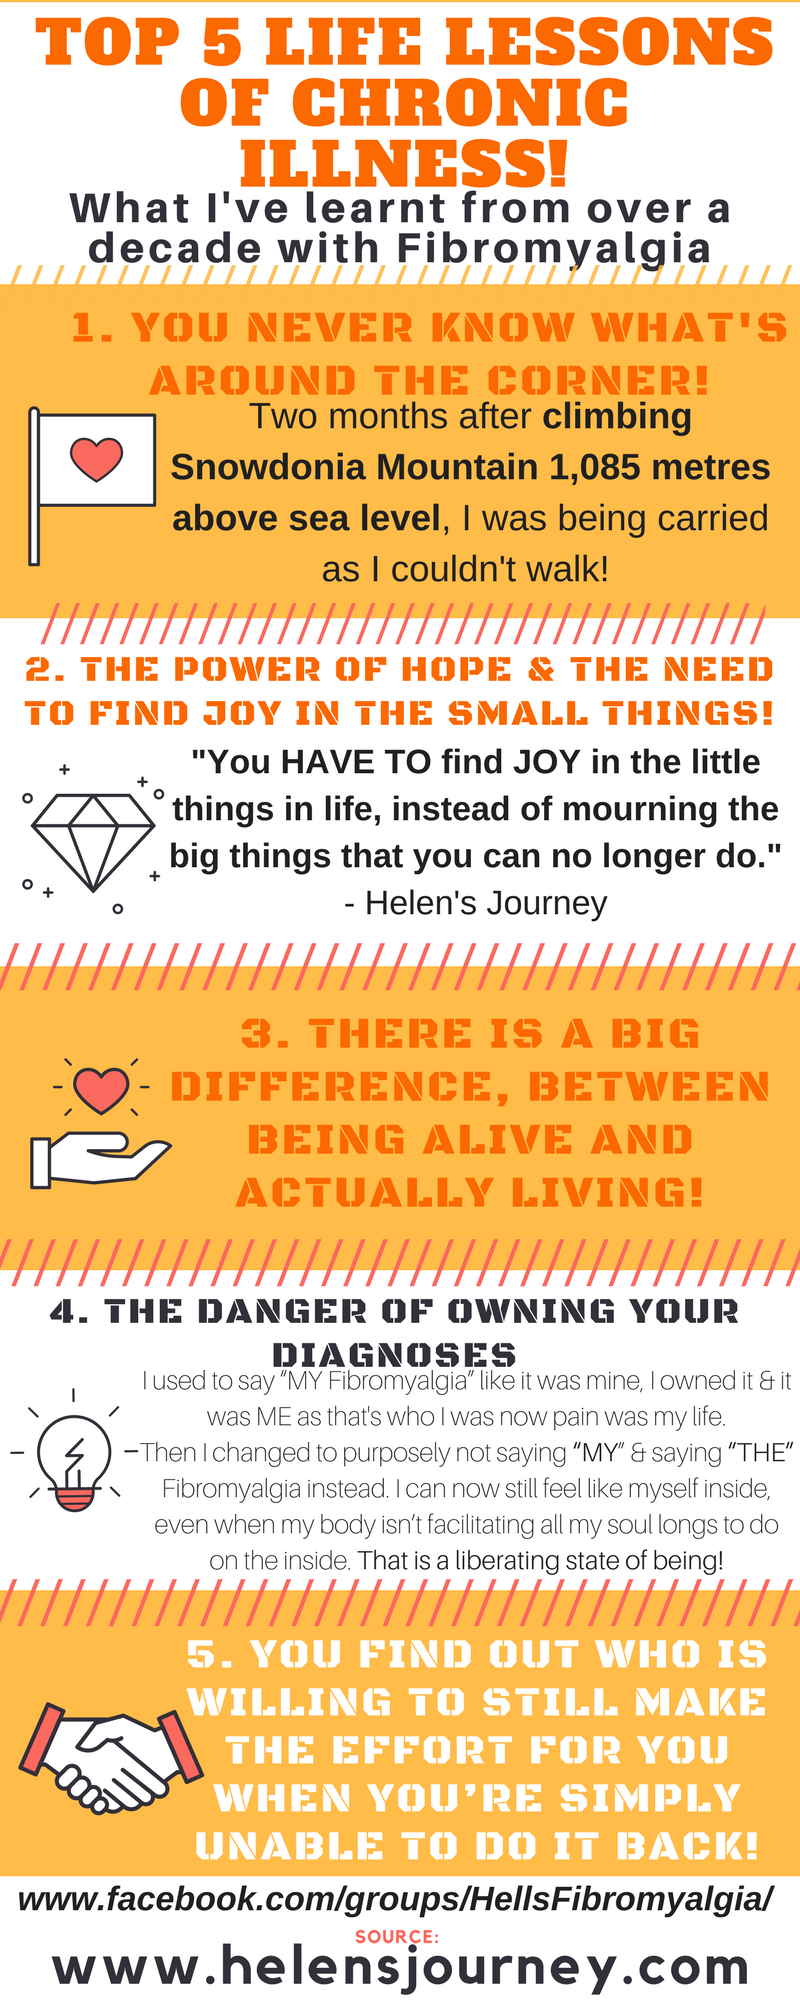 5 life lessons of chronic illness and what over a decade of Fibromyalgia has taught me! infographic by Helen's Journey blog www.helensjourney.com and weblink to Helen's Fibromyalgia Awareness Group on Facebook